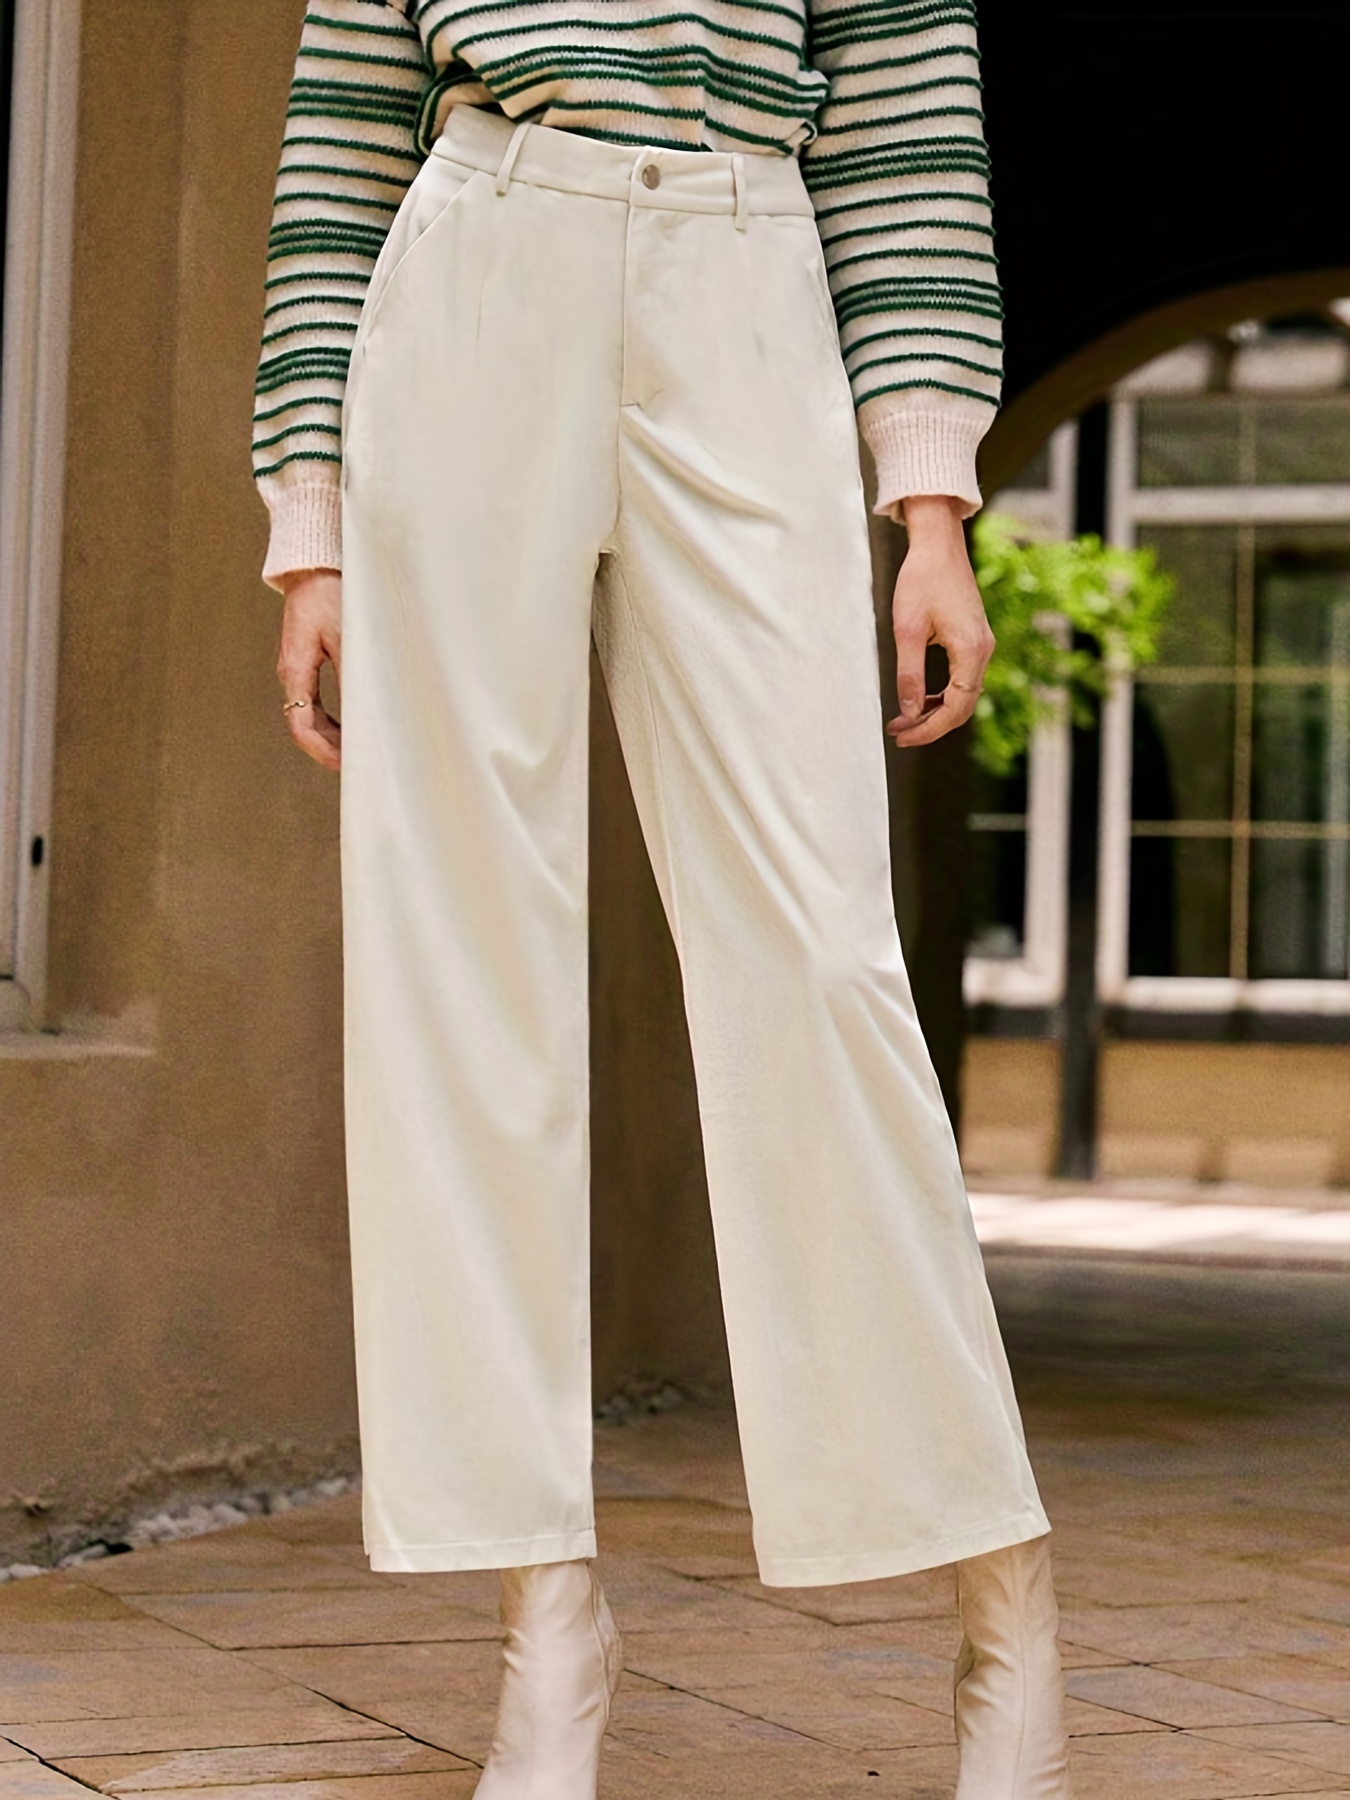 Solid High Waist Tailored Pants, Elegant Long Length Work Office Pants,  Women's Clothing